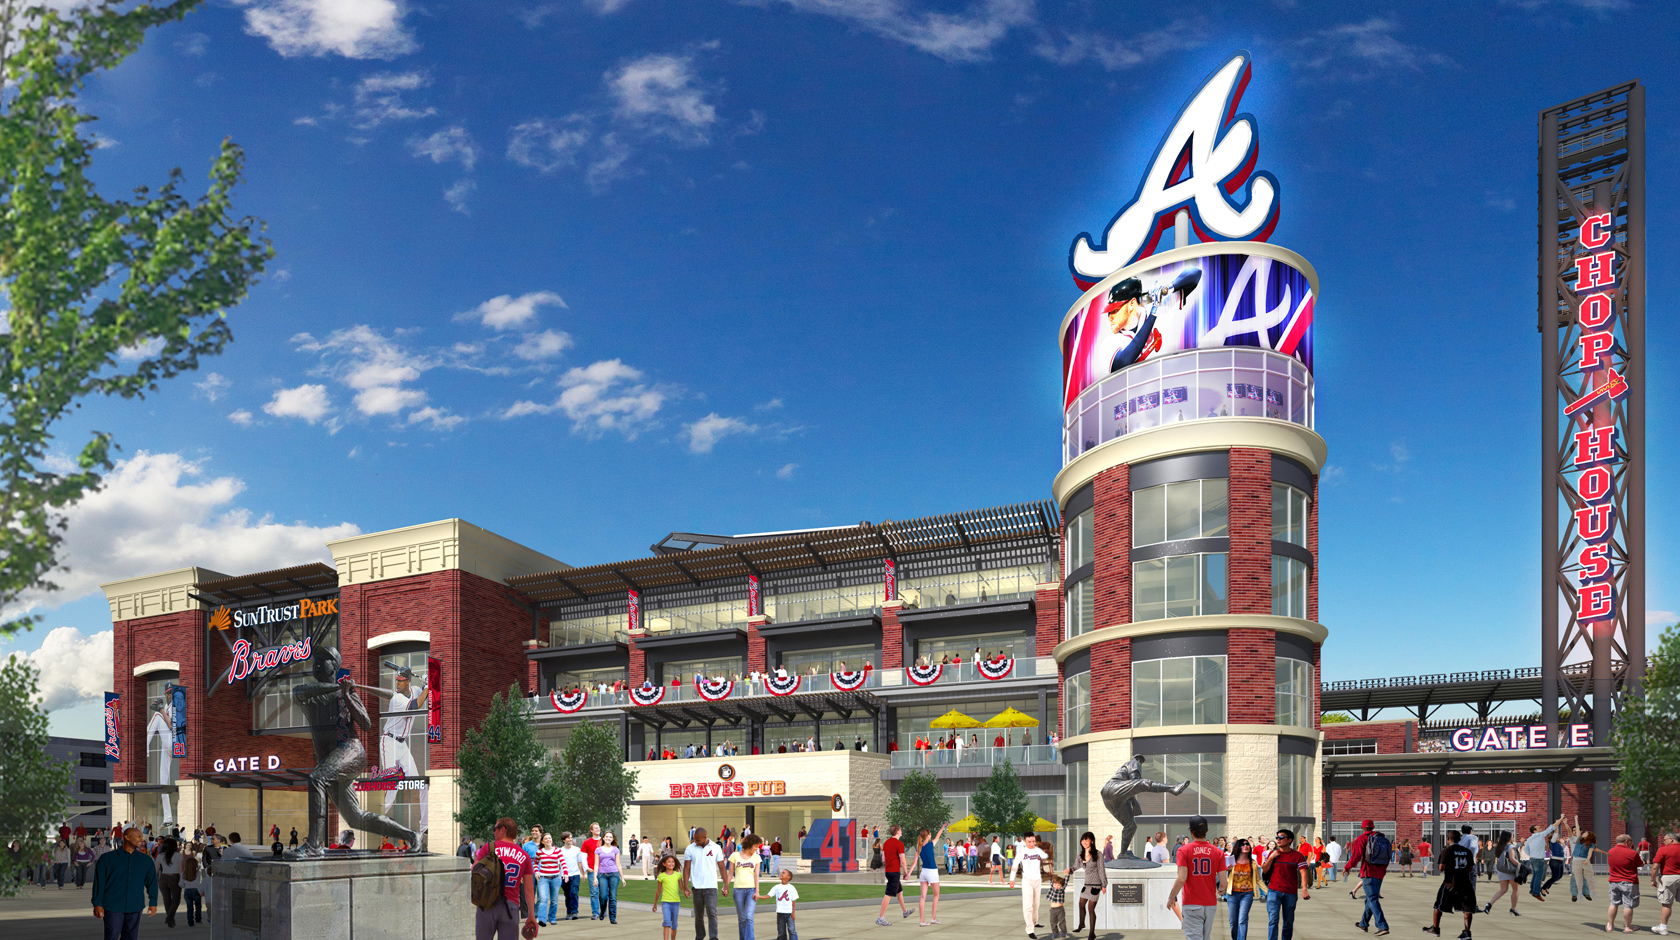 Truist Park - pictures, information and more of the Atlanta Braves